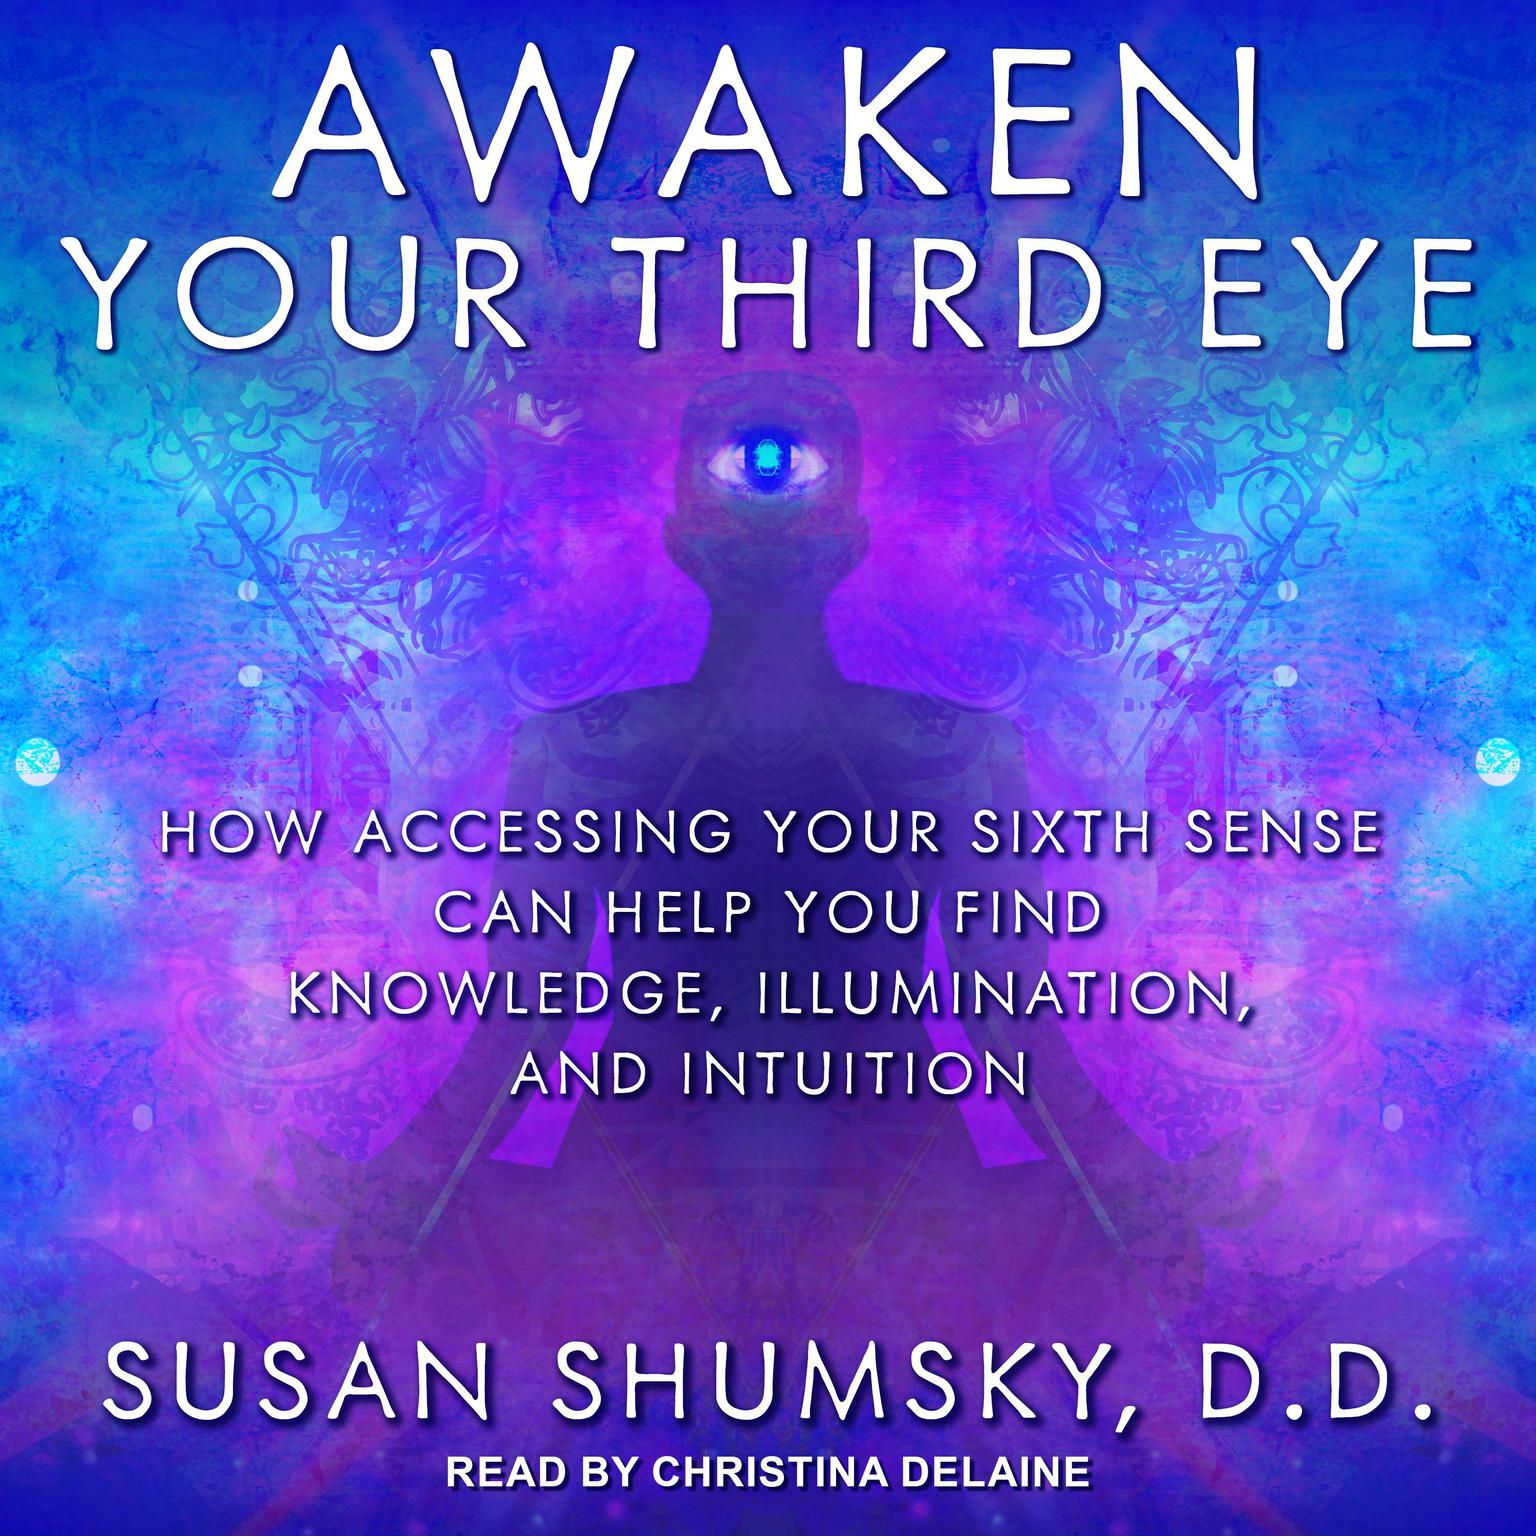 Awaken Your Third Eye: How Accessing Your Sixth Sense Can Help You Find Knowledge, Illumination, and Intuition Audiobook, by Susan Shumsky, DD